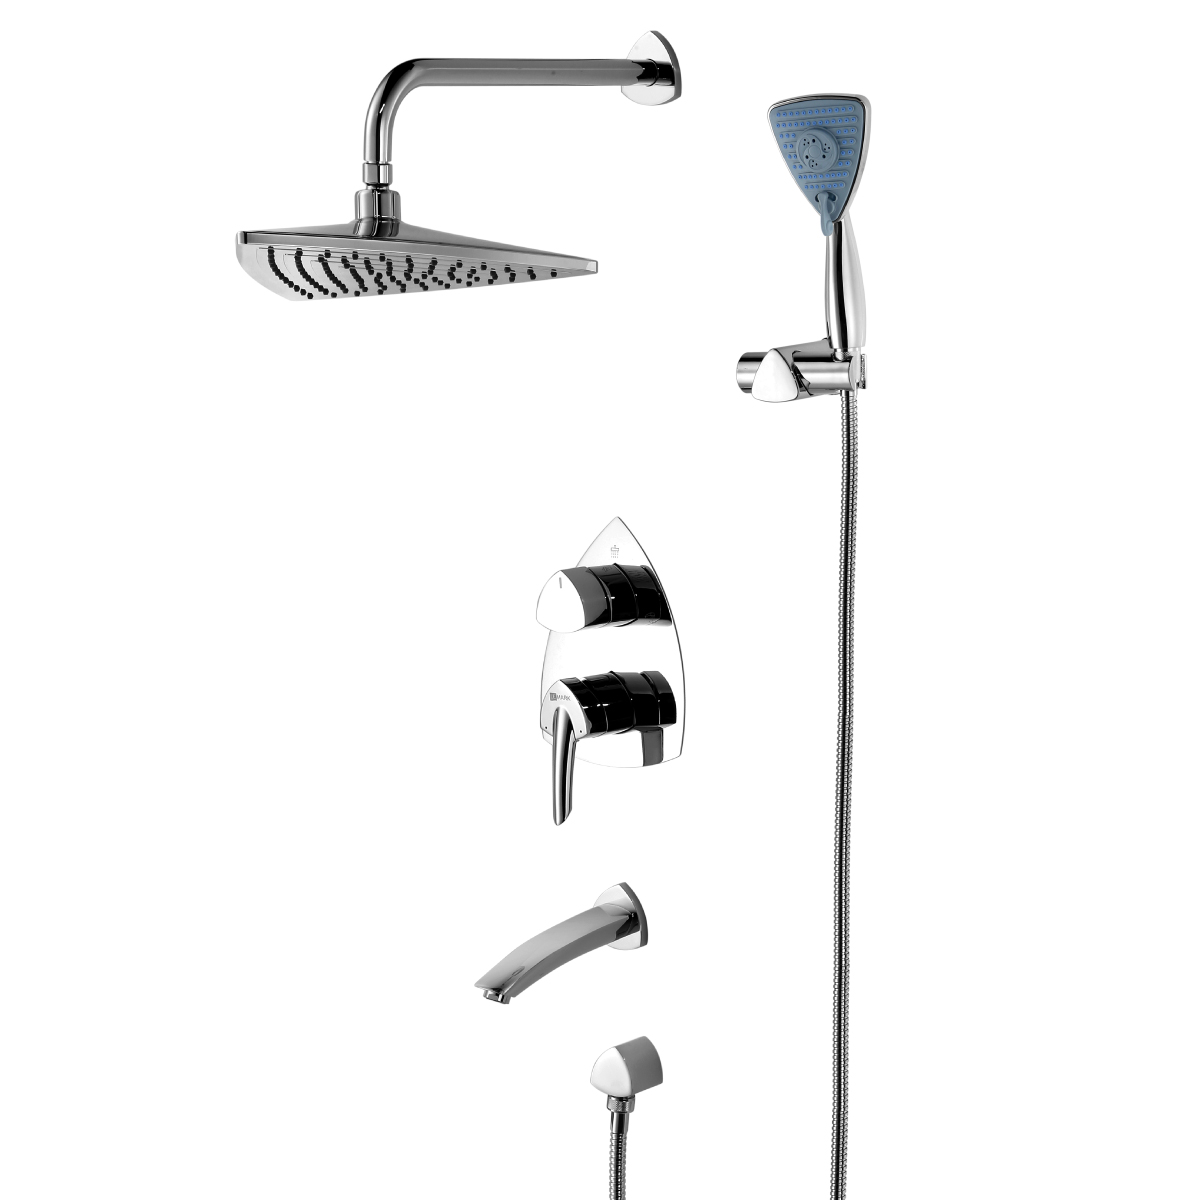 LM3522C Built-in bath and shower faucet